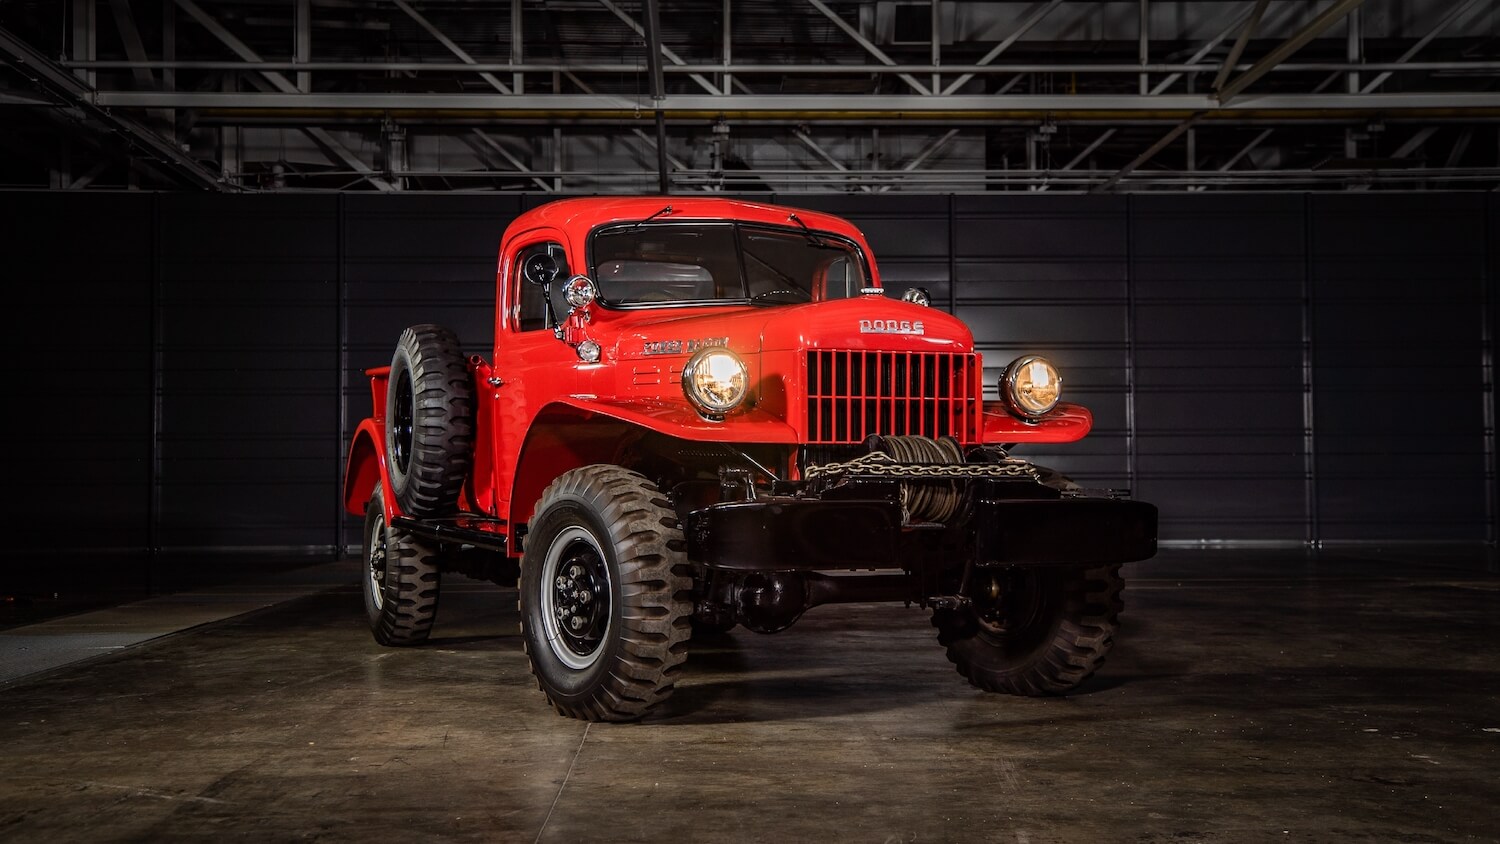 Bright red 1946 Dodge Power Wagon parked in a garage.